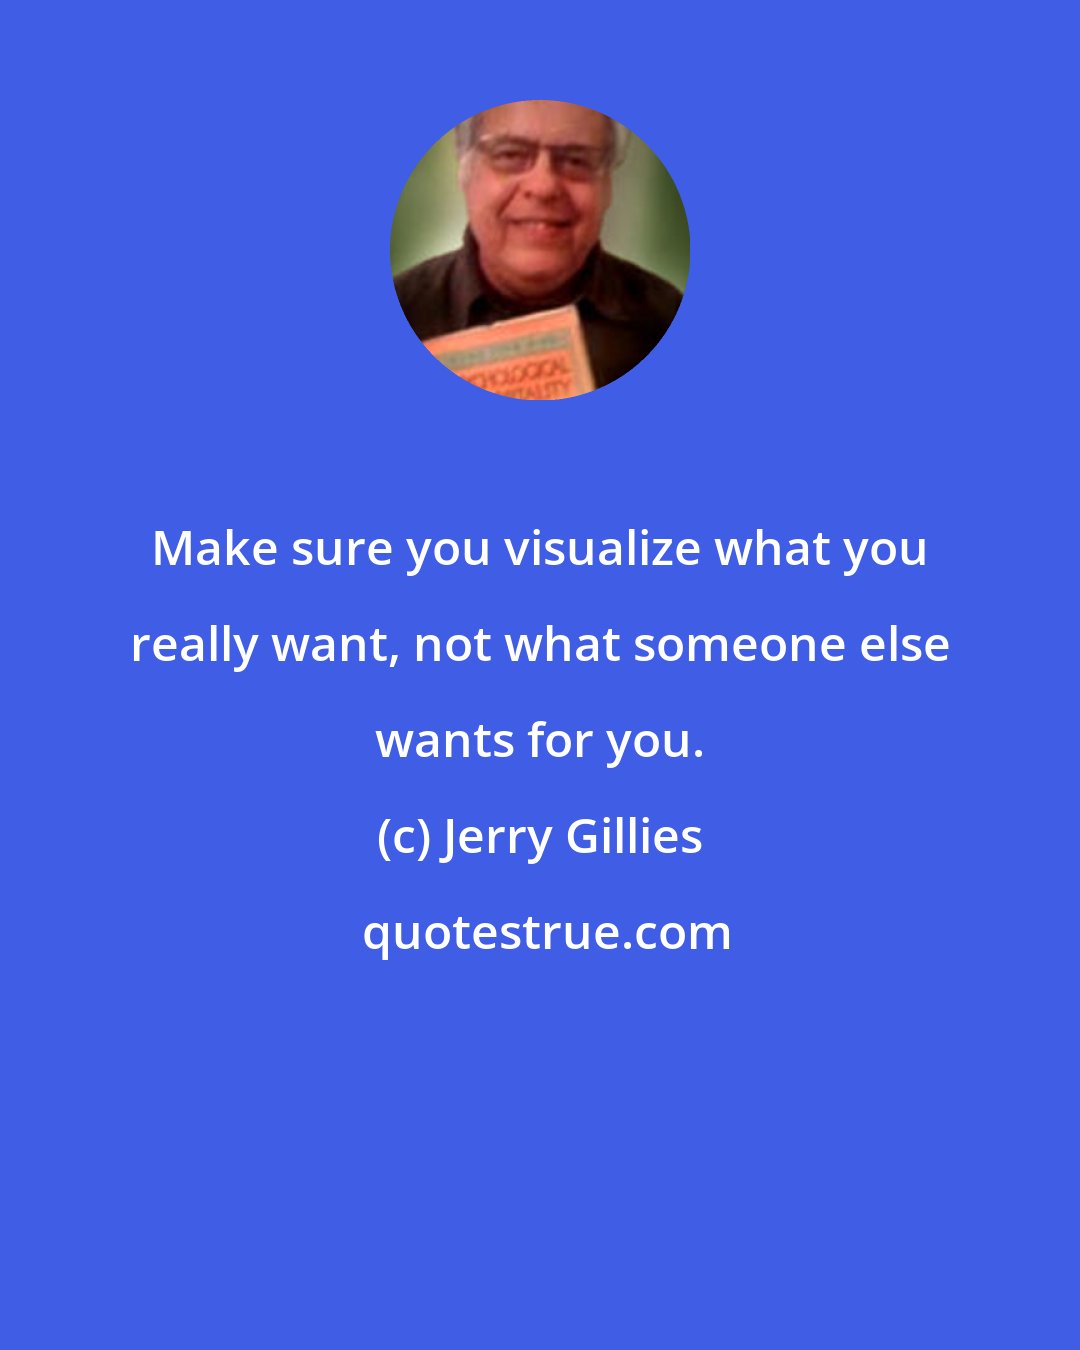 Jerry Gillies: Make sure you visualize what you really want, not what someone else wants for you.